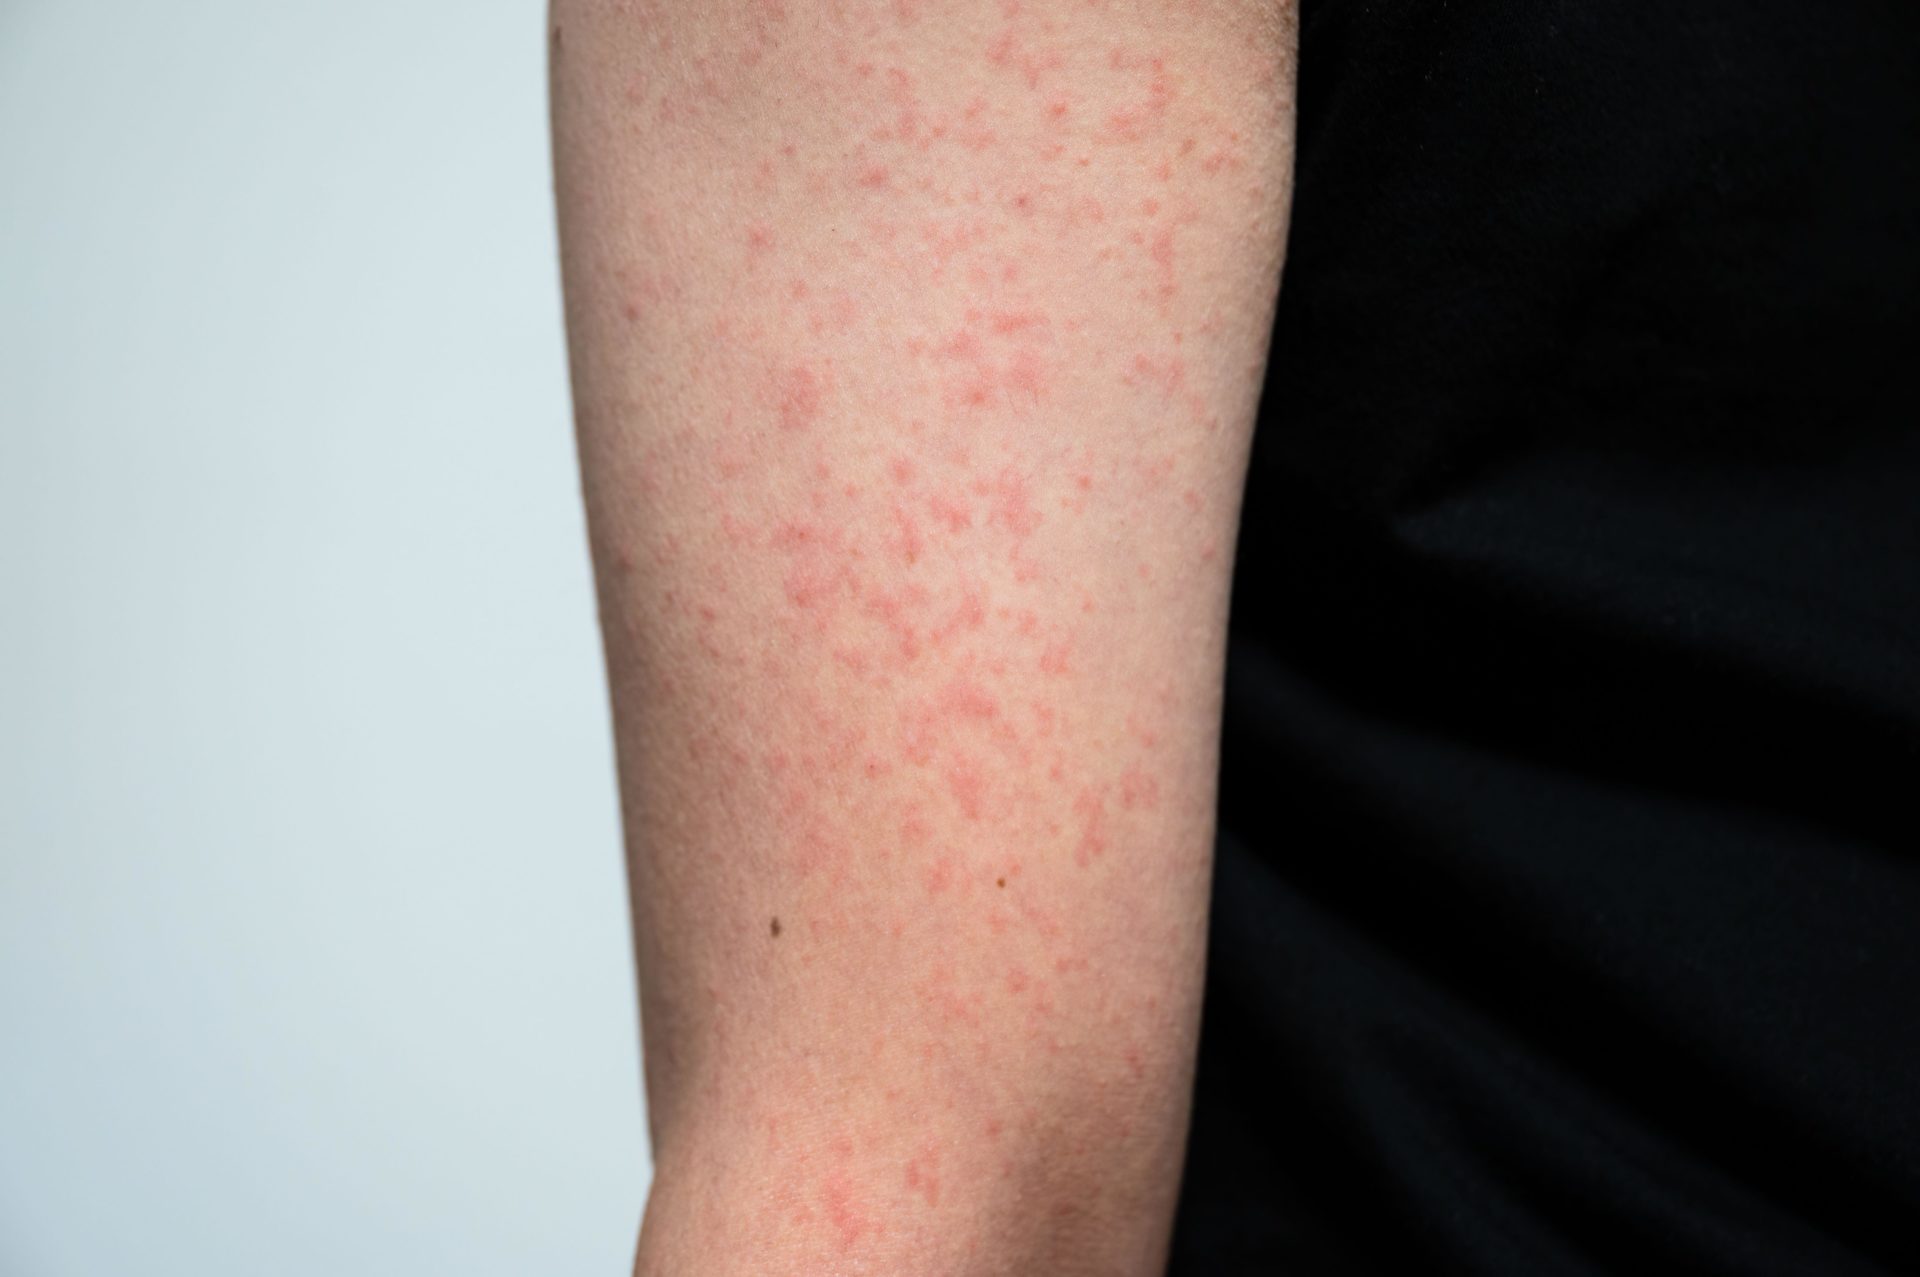 The arm of a patient with measles.